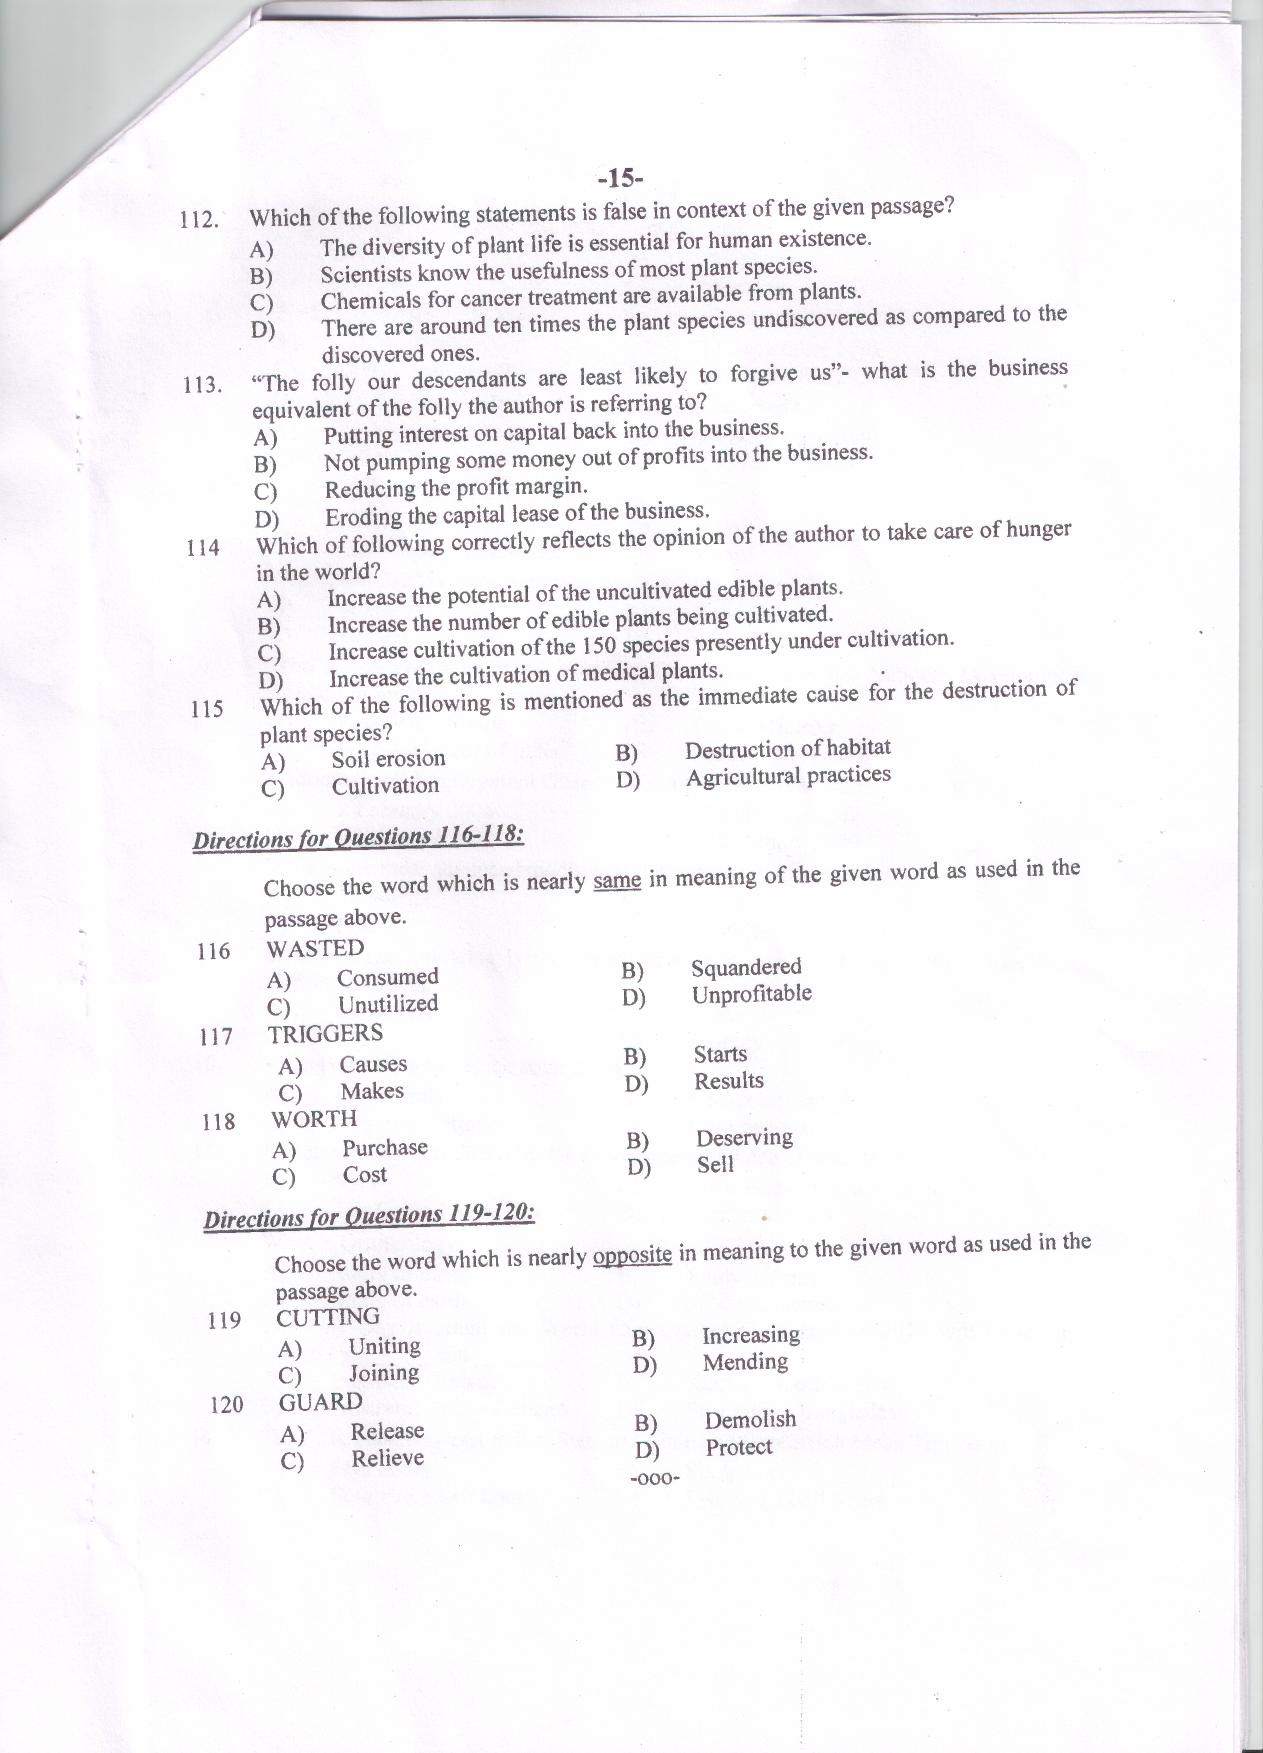 PU MET 2014 Question Booklet with Key - Page 15